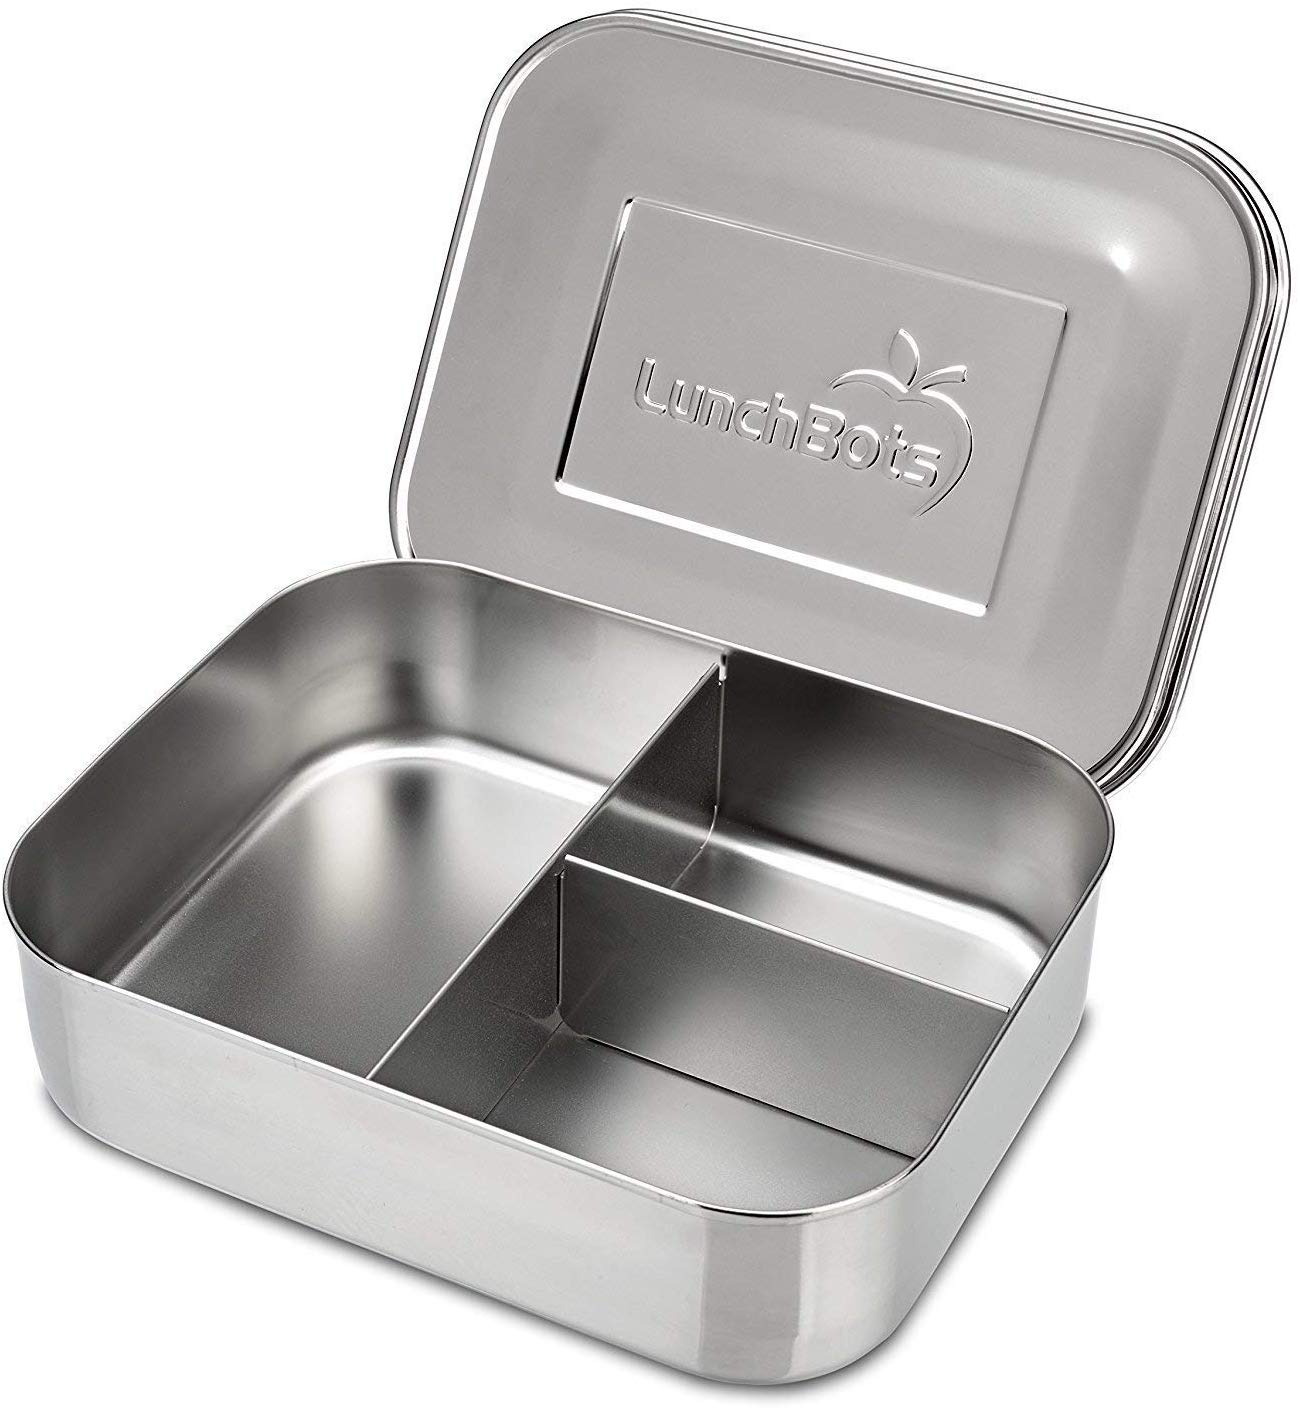 Review of LunchBots Medium Trio II Divided Stainless Steel Food Container